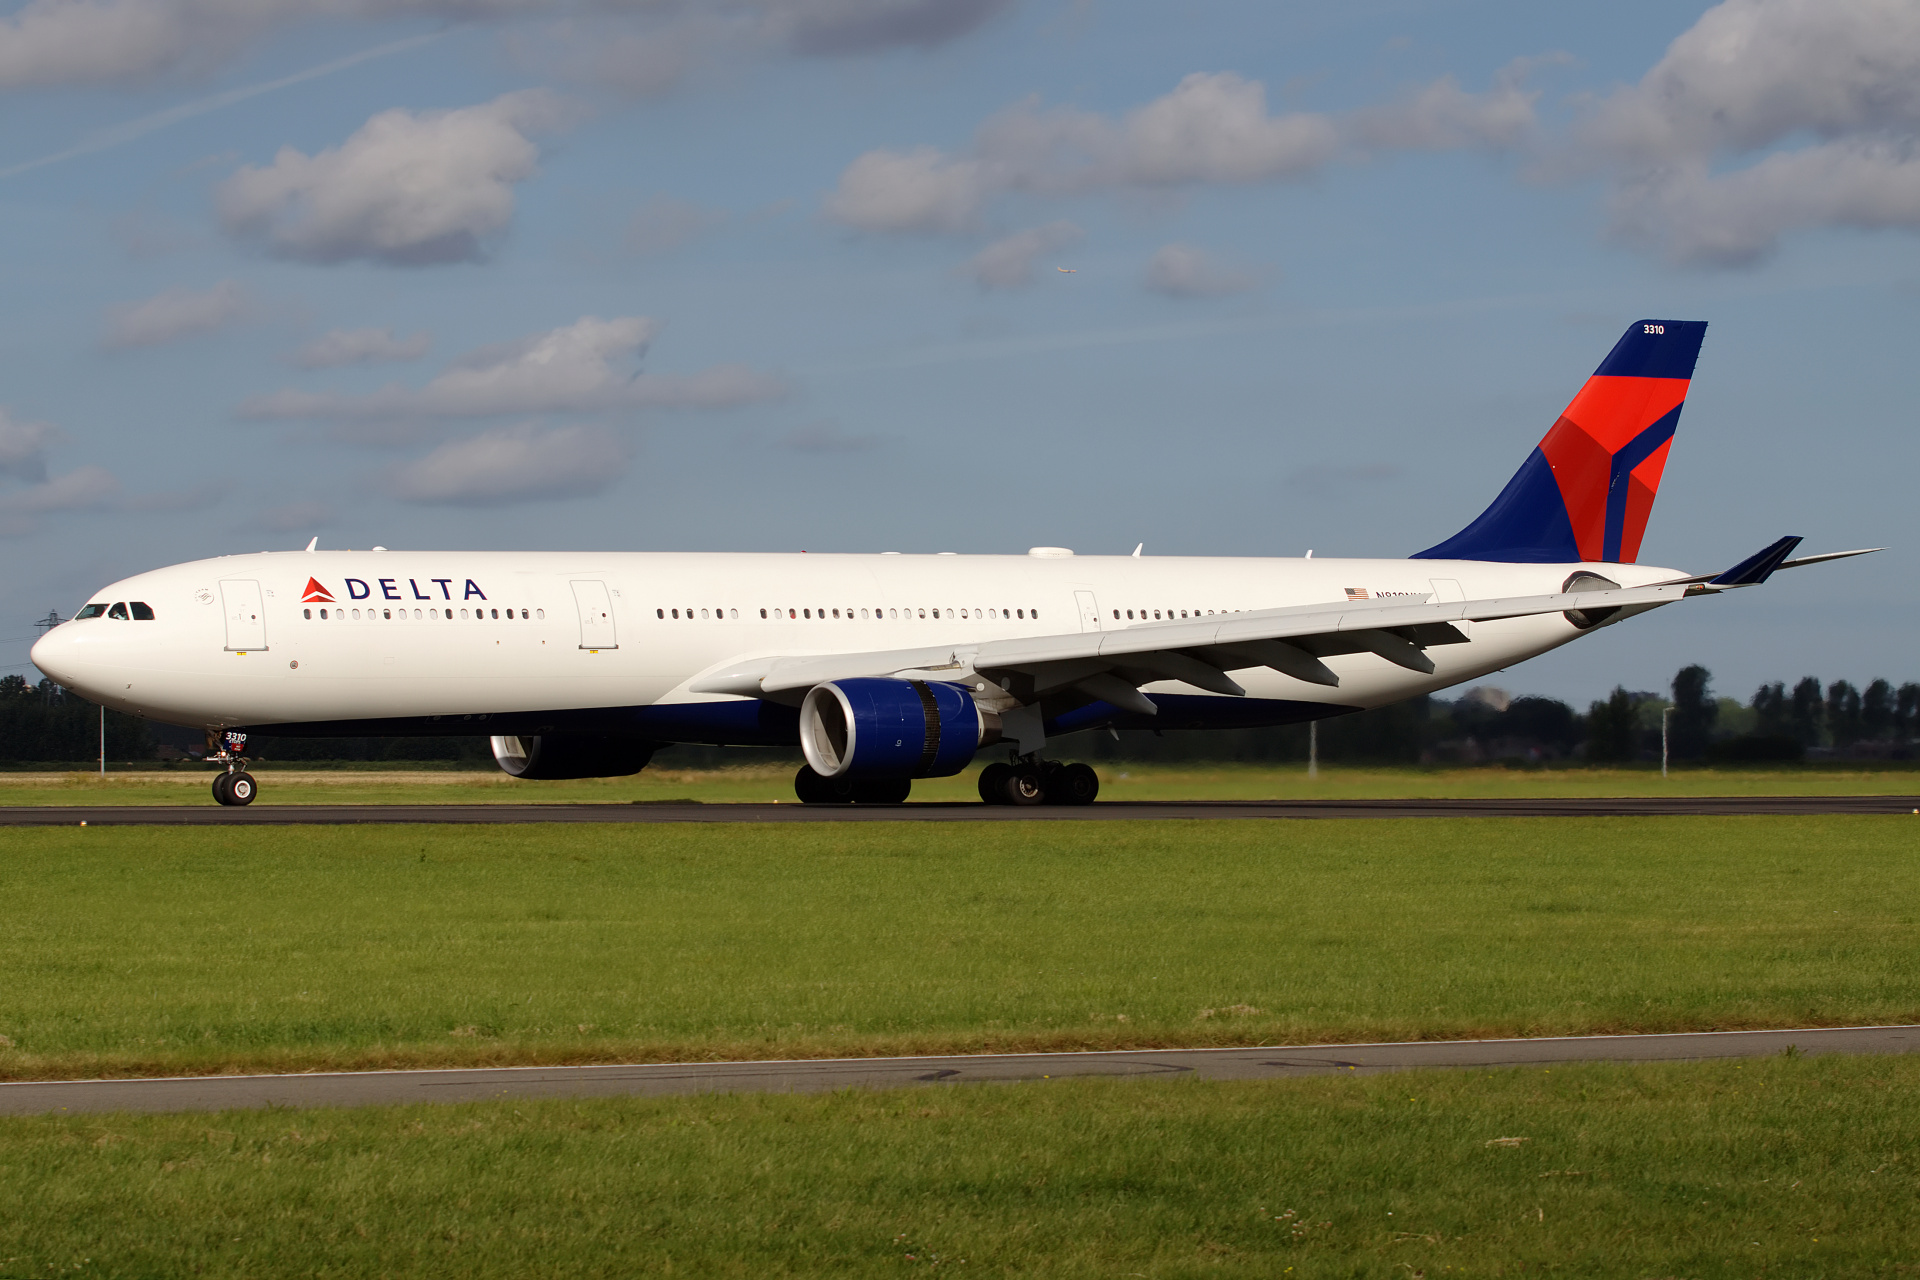 N810NW (Aircraft » Schiphol Spotting » Airbus A330-300 » Delta Airlines)